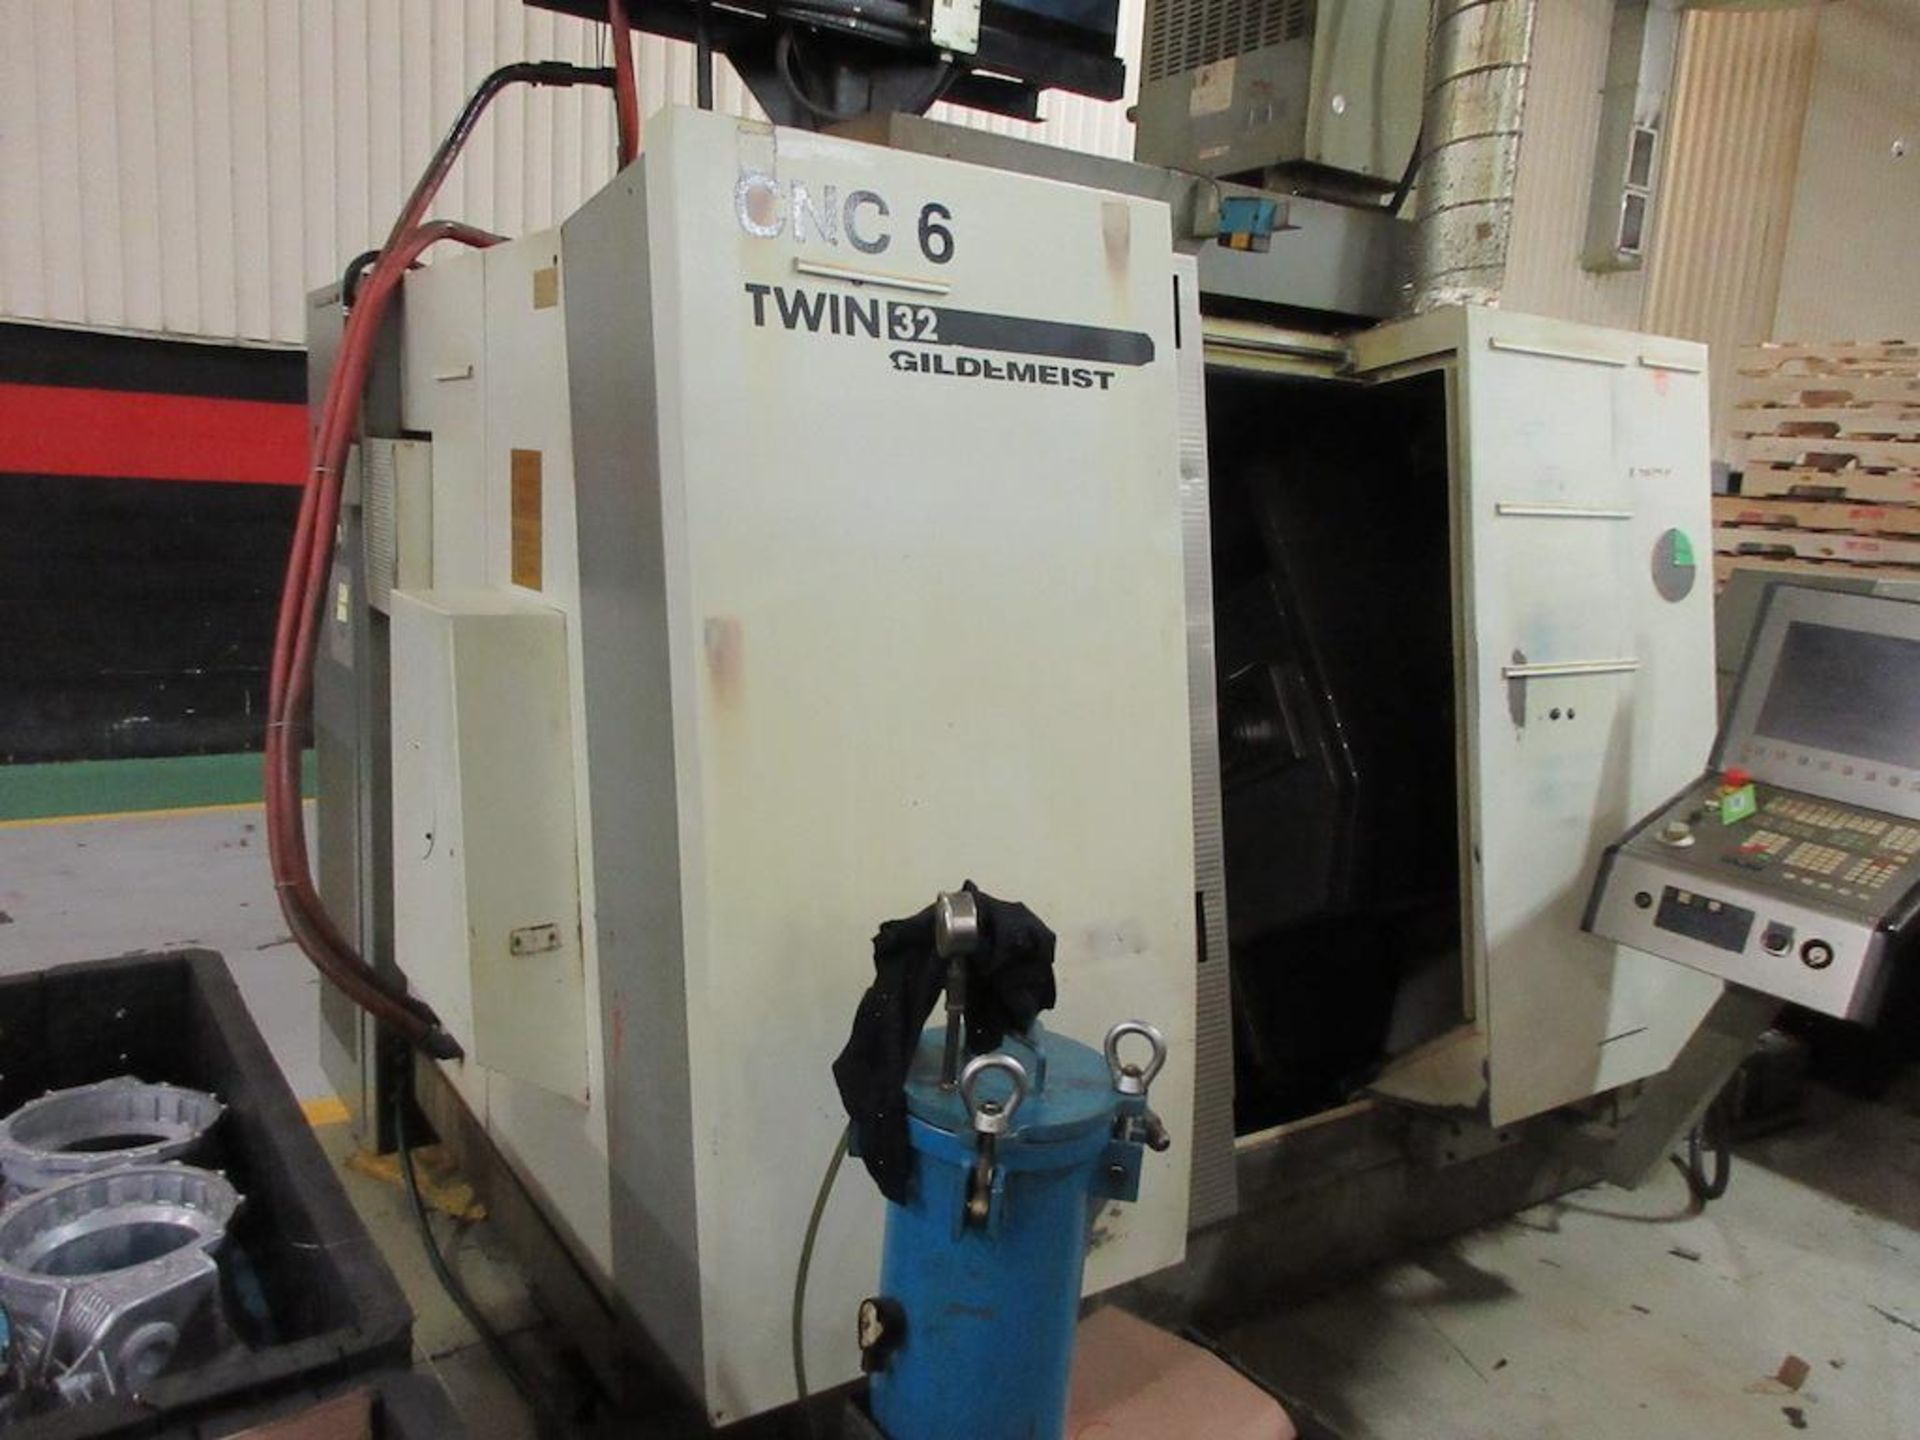 2004 DMG CNC Lathe, Model Twin 32, Twin Spindle, 4 Axis, CNC Control, Bar Material Diameter 32 mm, - Image 10 of 18